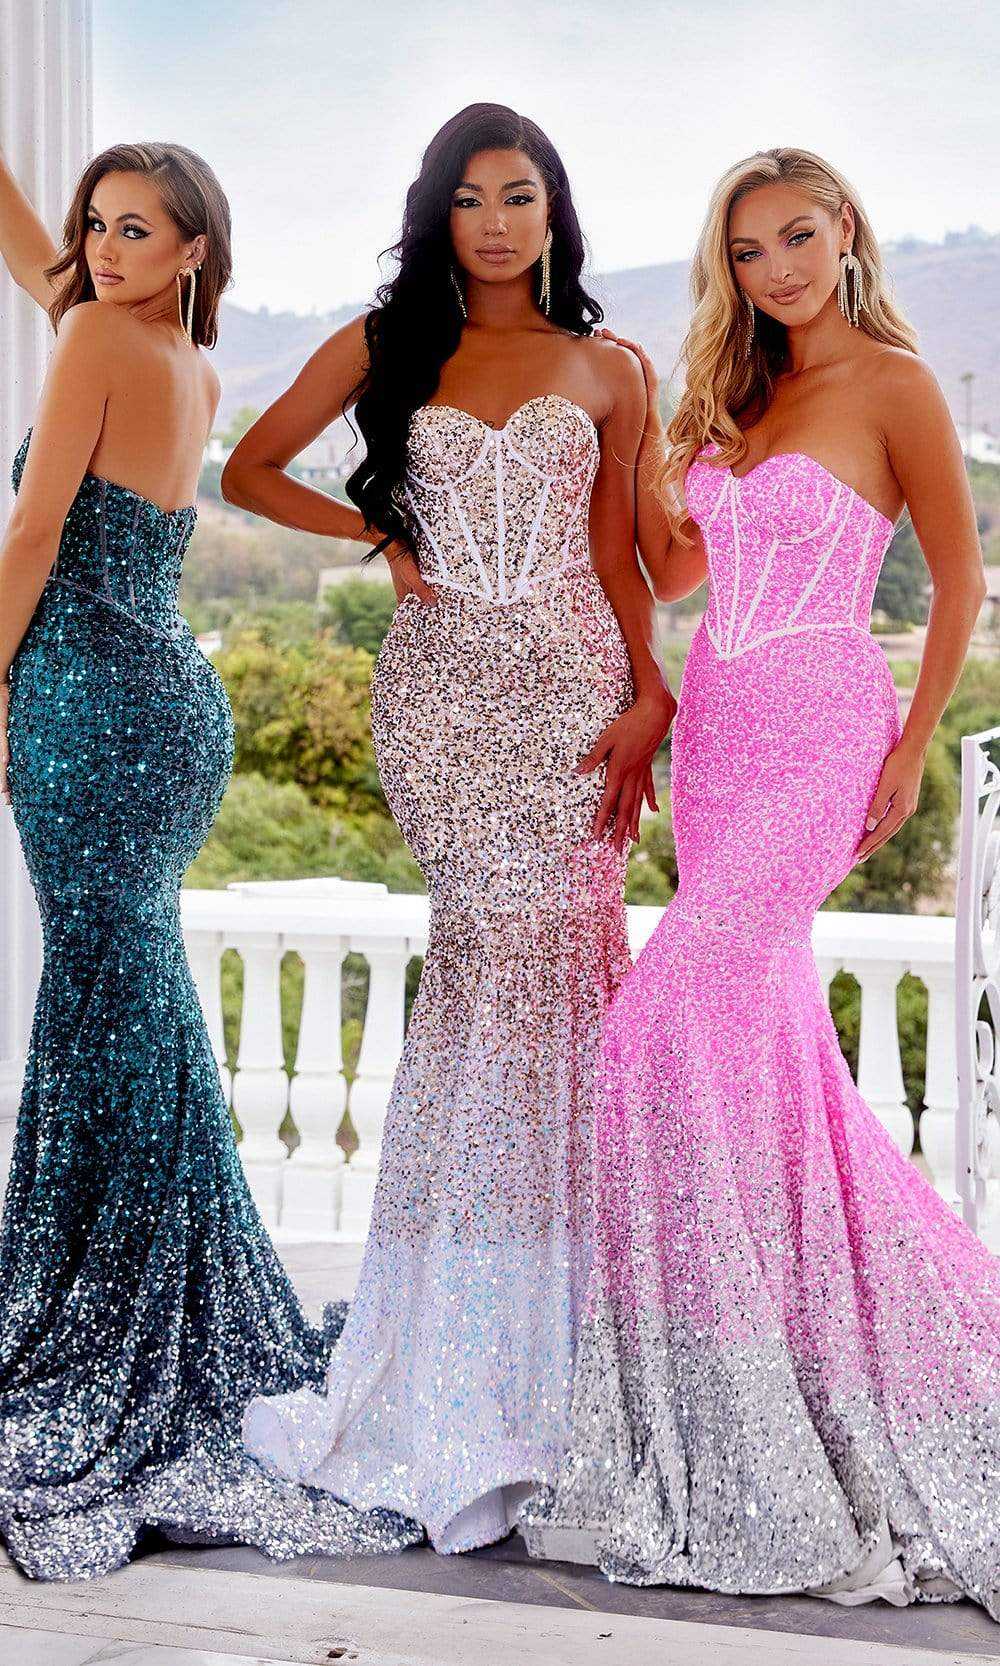 Portia and Scarlett, Portia and Scarlett - Ps22346 Strapless Ombre Sequin Gown